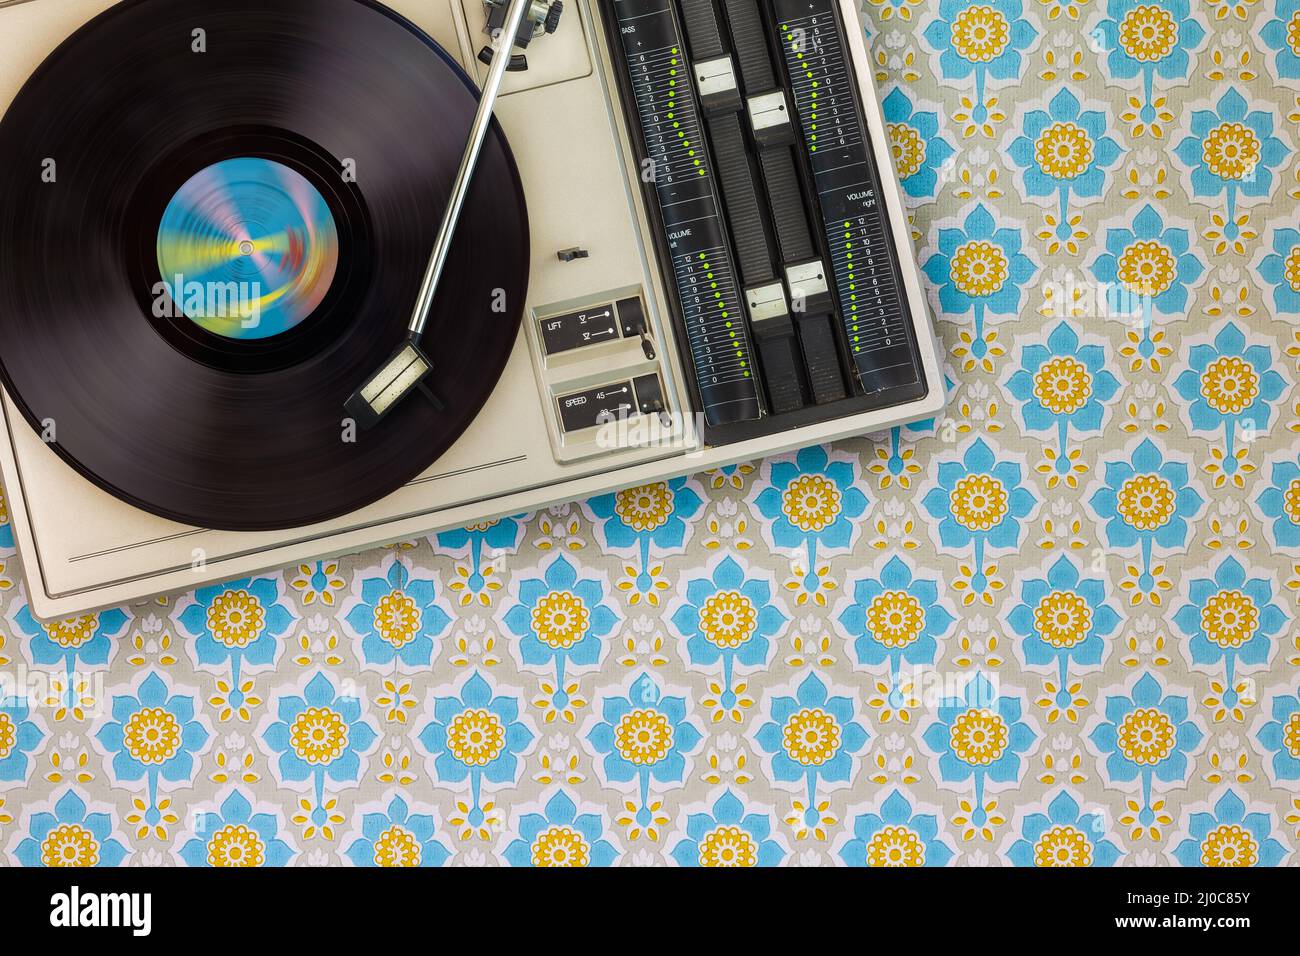 Old record player on top of flower wallpaper Stock Photo